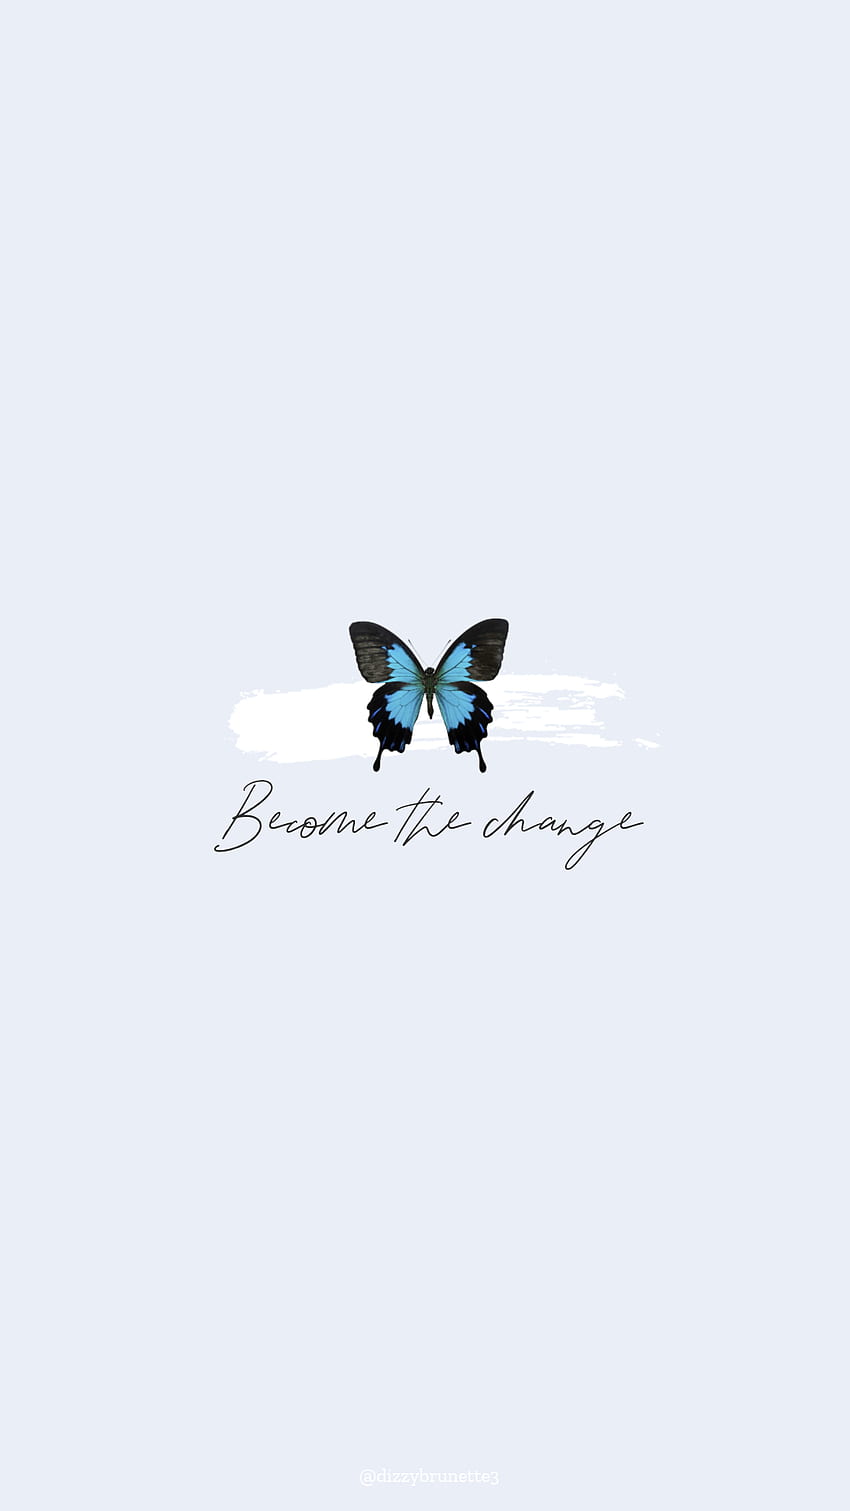 Blue butterfly wallpaper, phone background, aesthetic, blue, black, white, become the change - VSCO